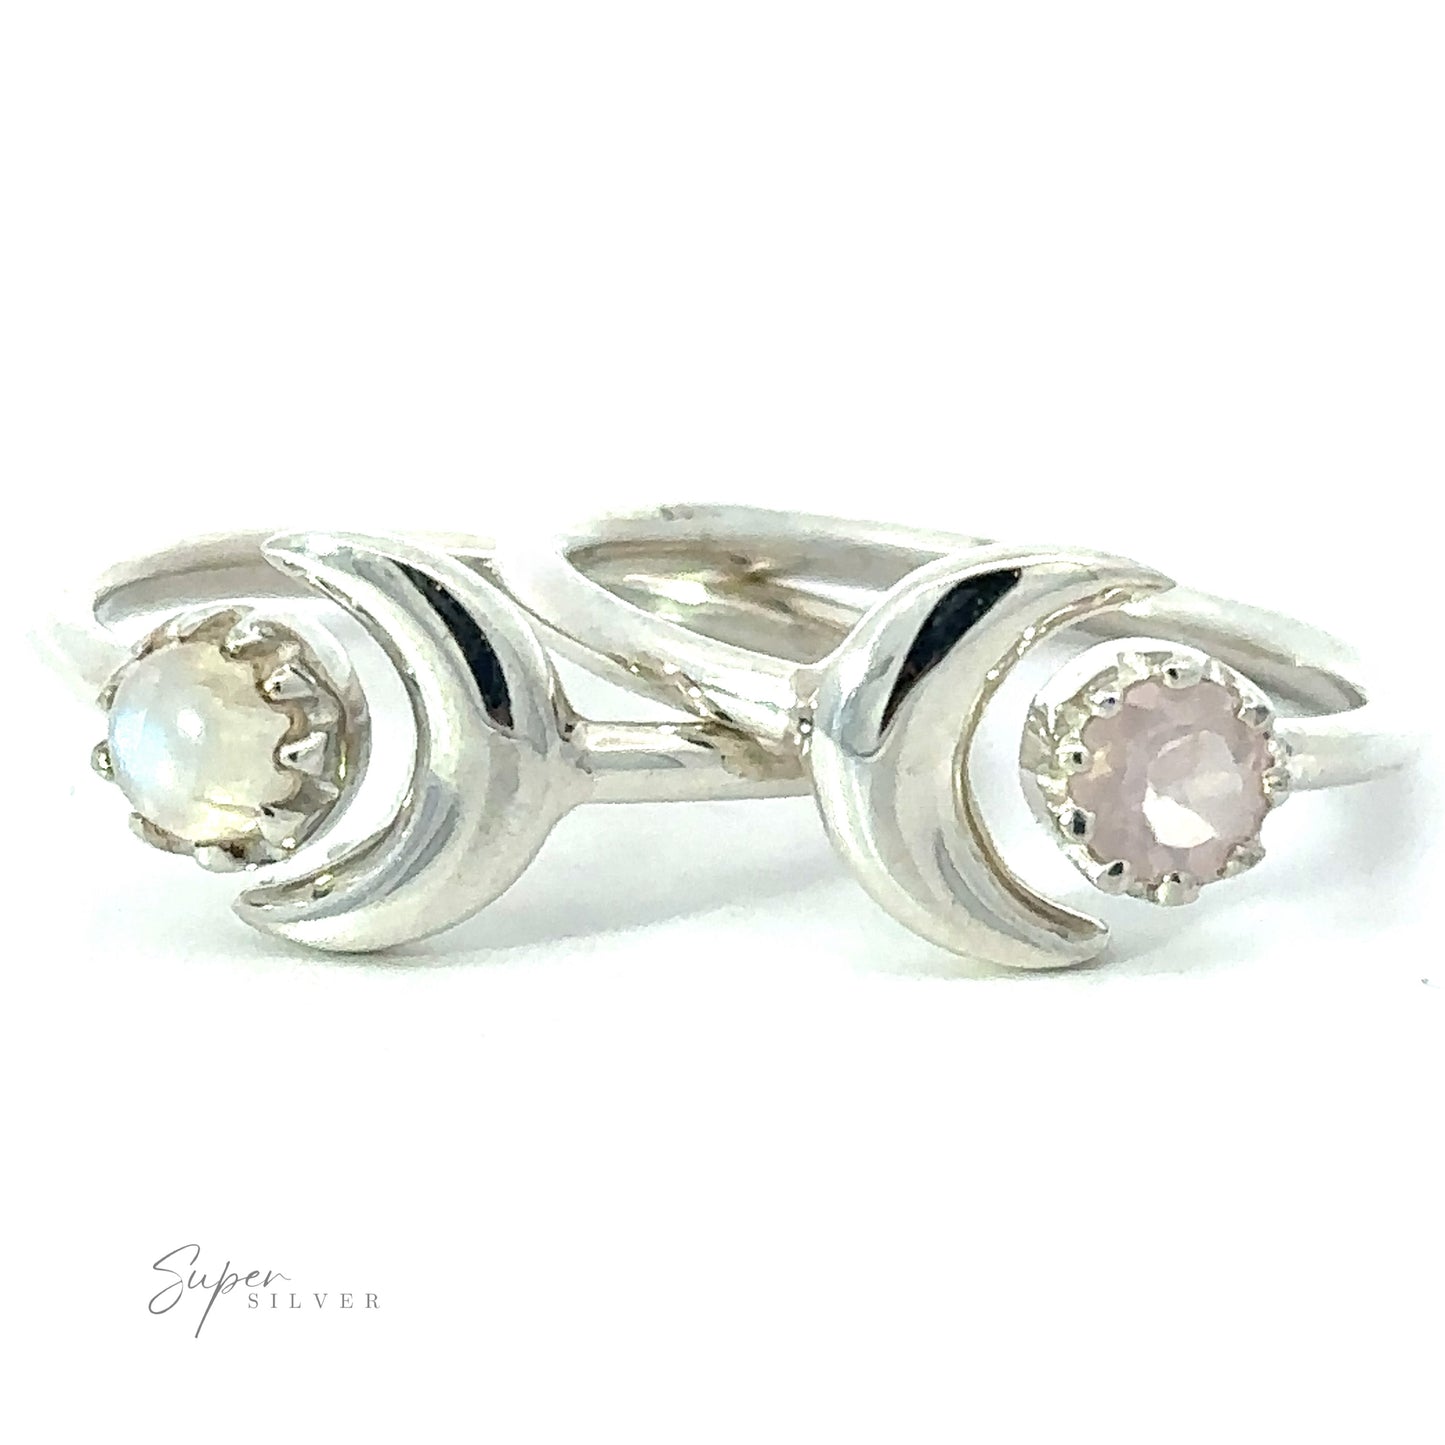 Online Exclusive Adjustable Gemstone Ring With Moon Design with two bands featuring wave-like designs, each band holding a light pink moonstone, displayed against a white background.